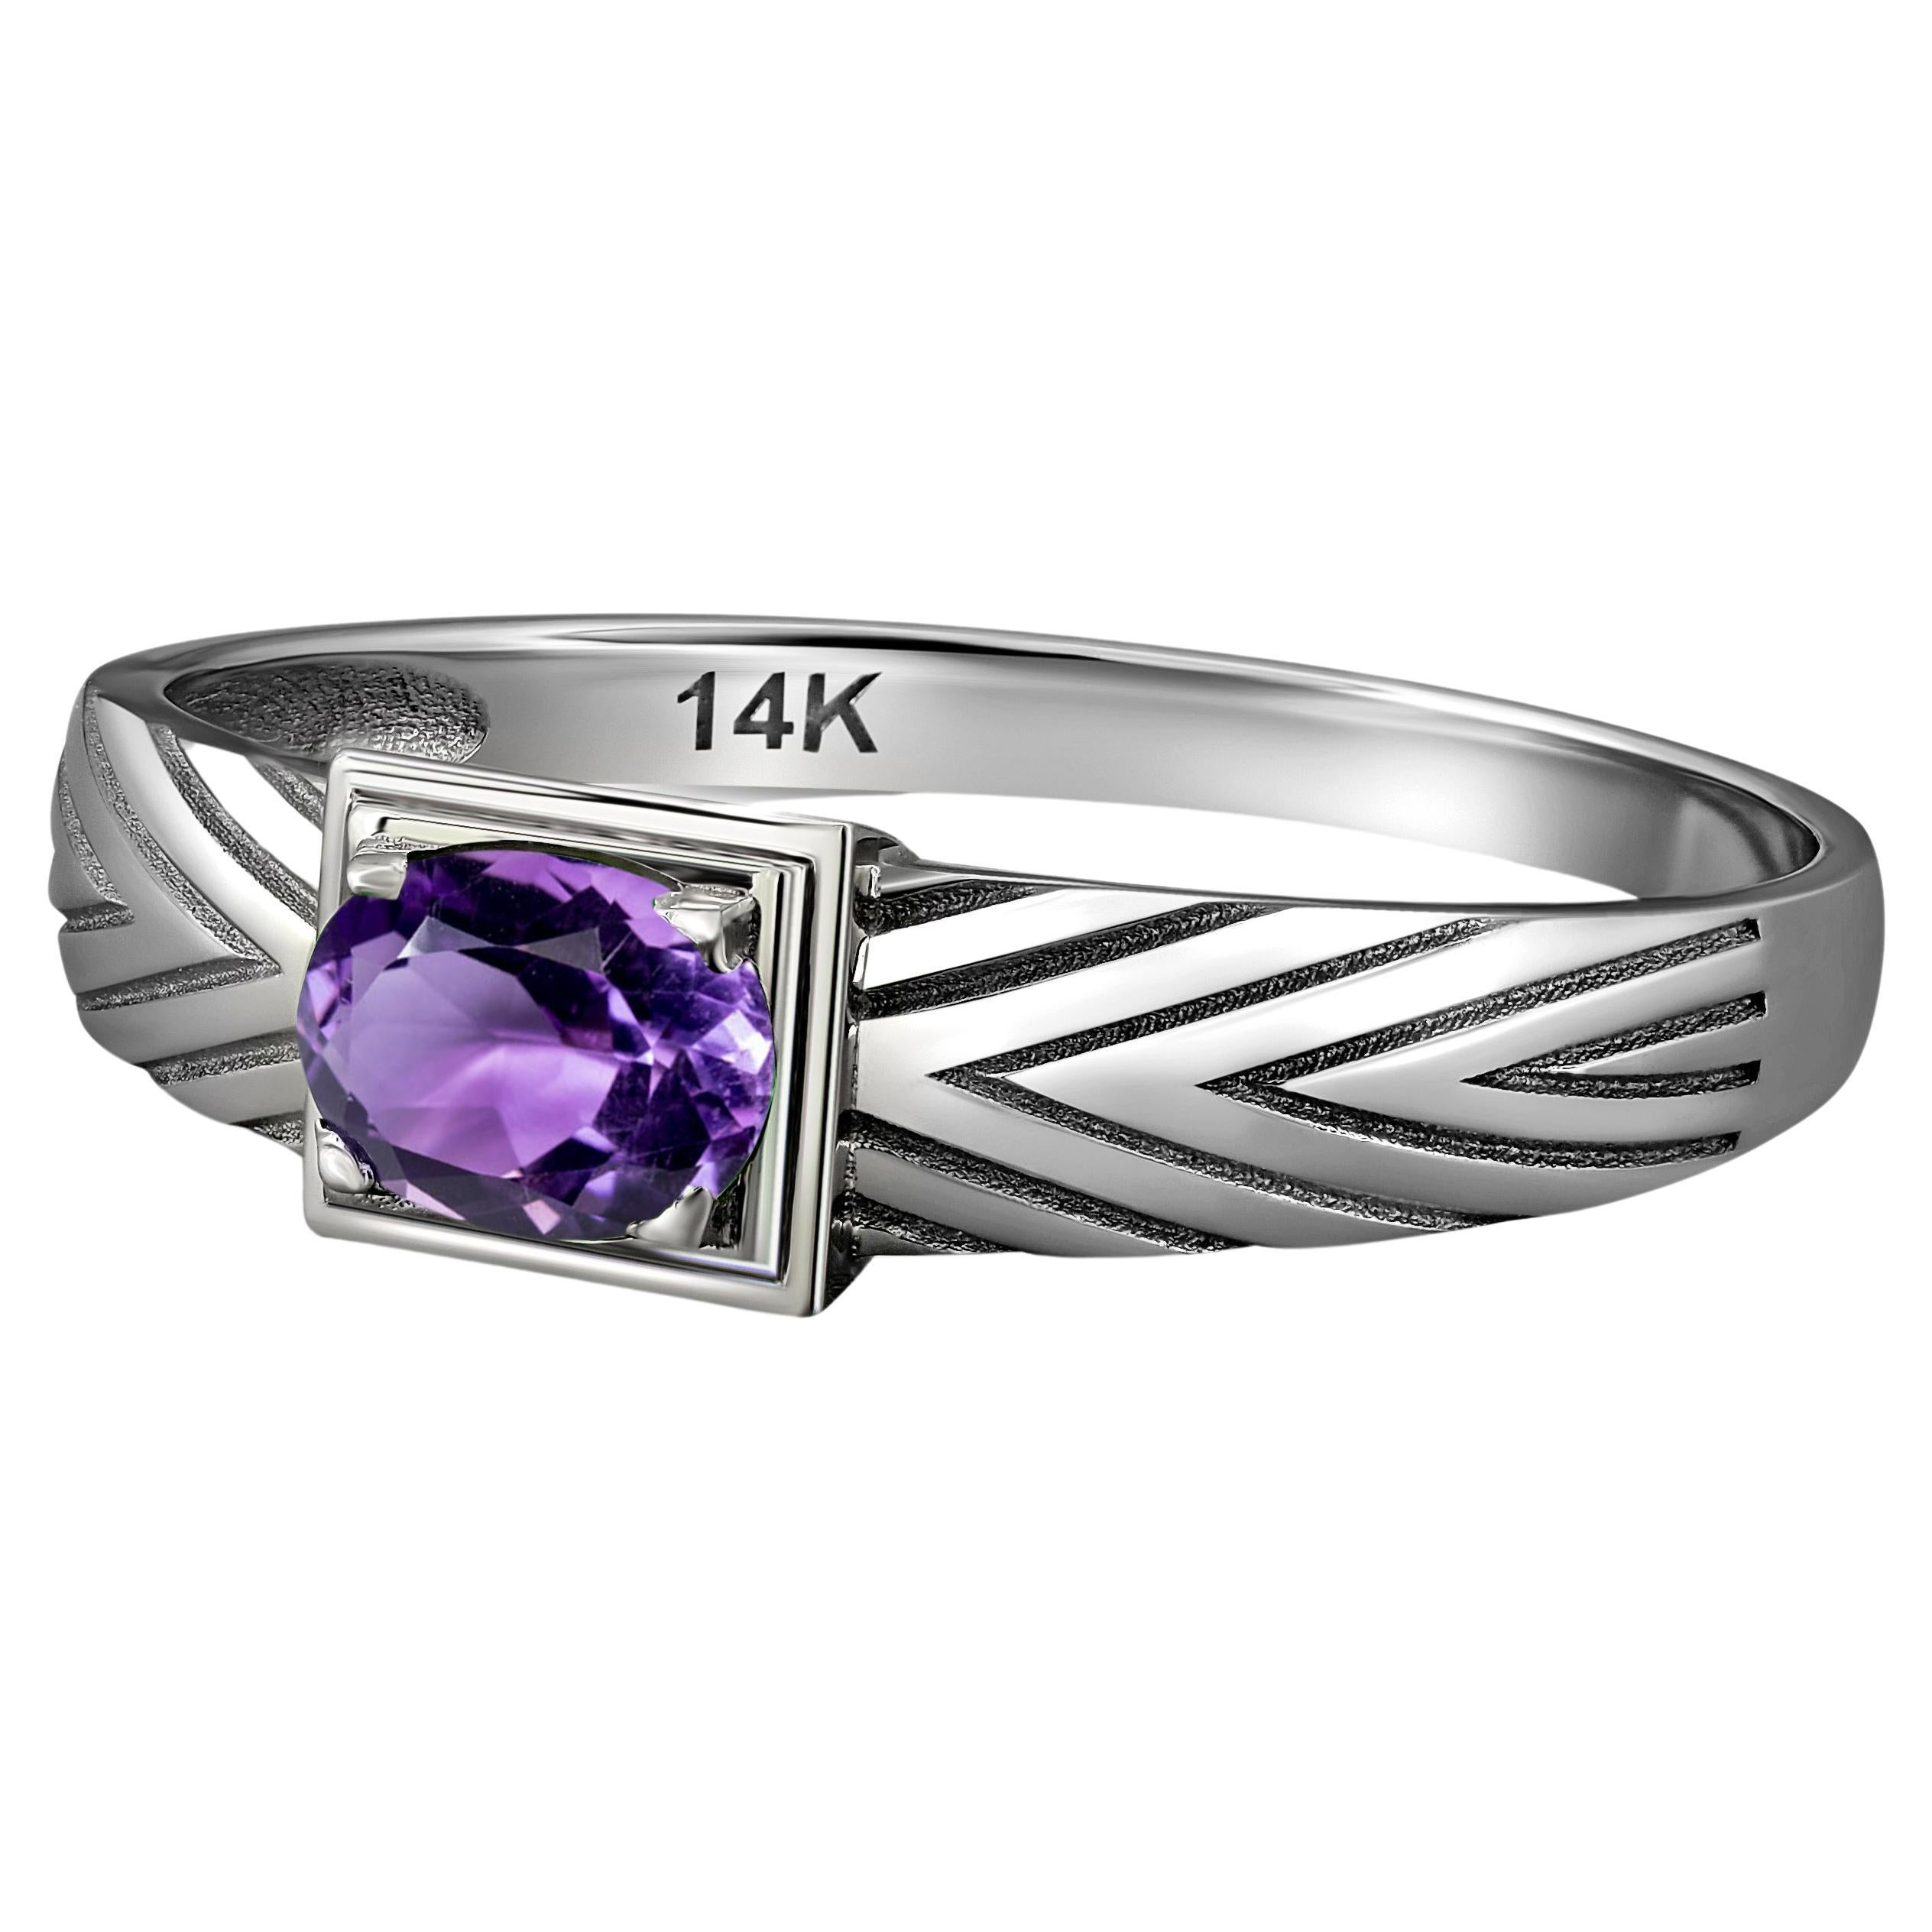 14K Gold Mens Ring with Amethyst.  For Sale